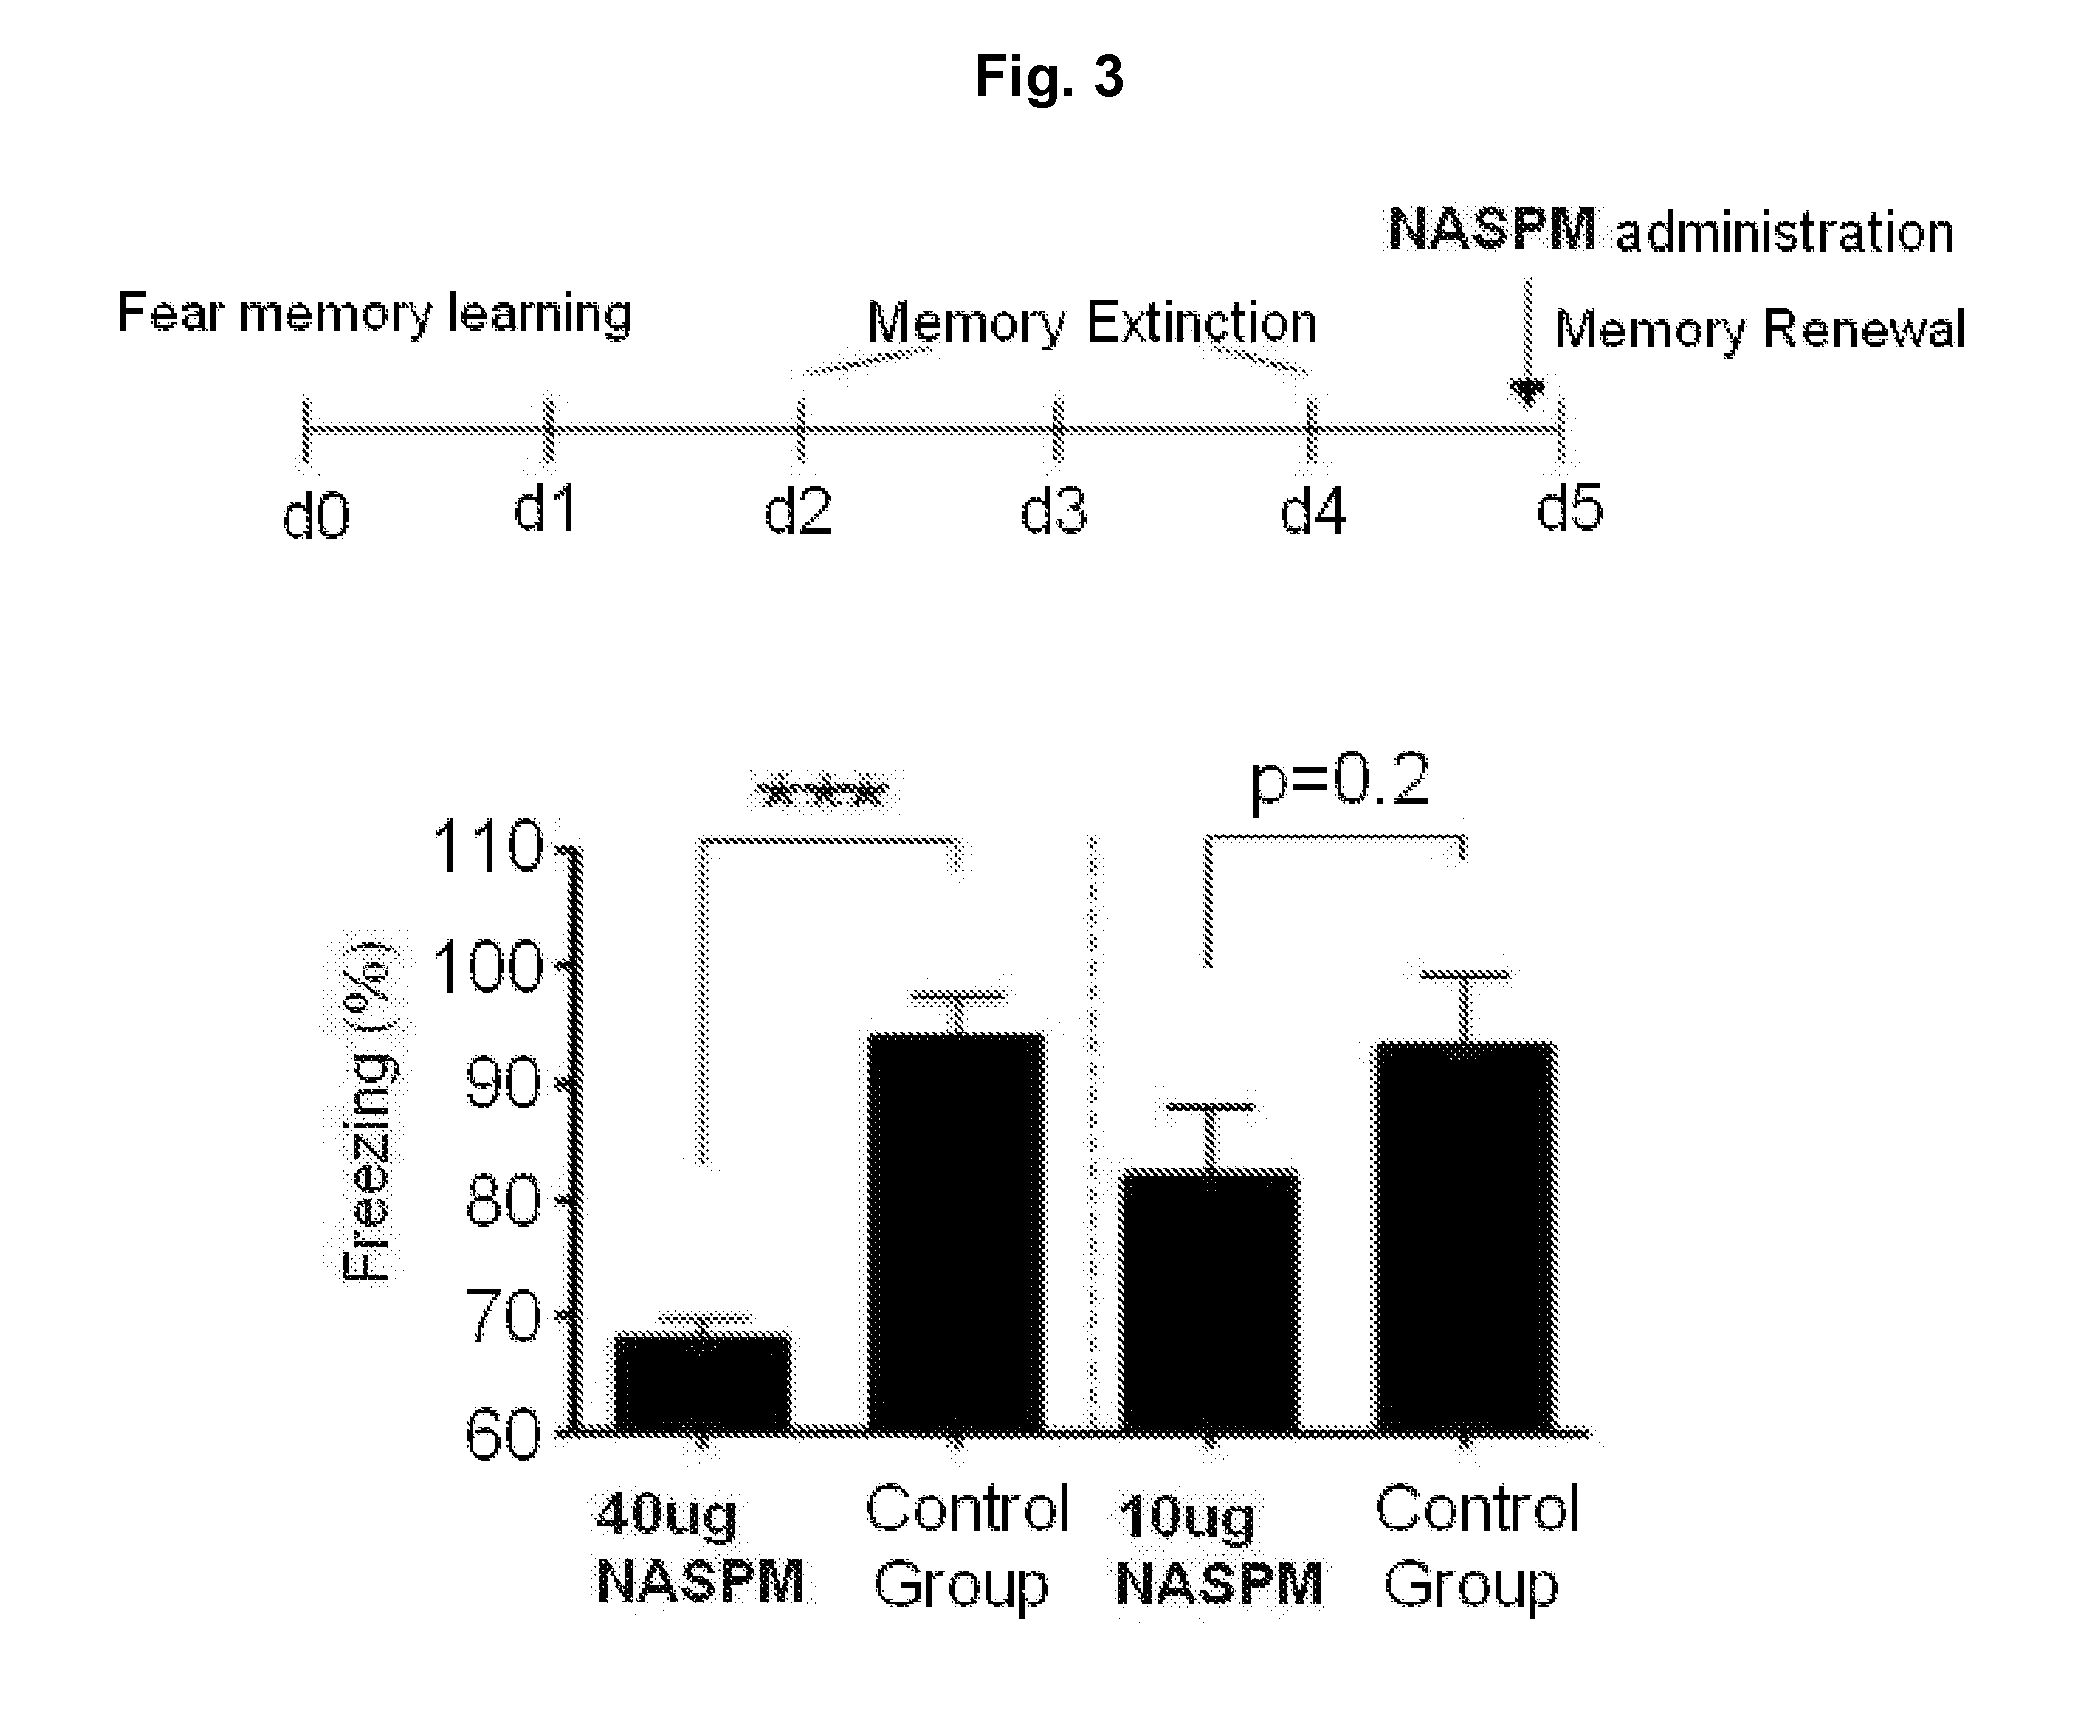 Pharmaceutical composition containing glur2-lacking ampar antagonist for preventing or treating psychiatric illnesses